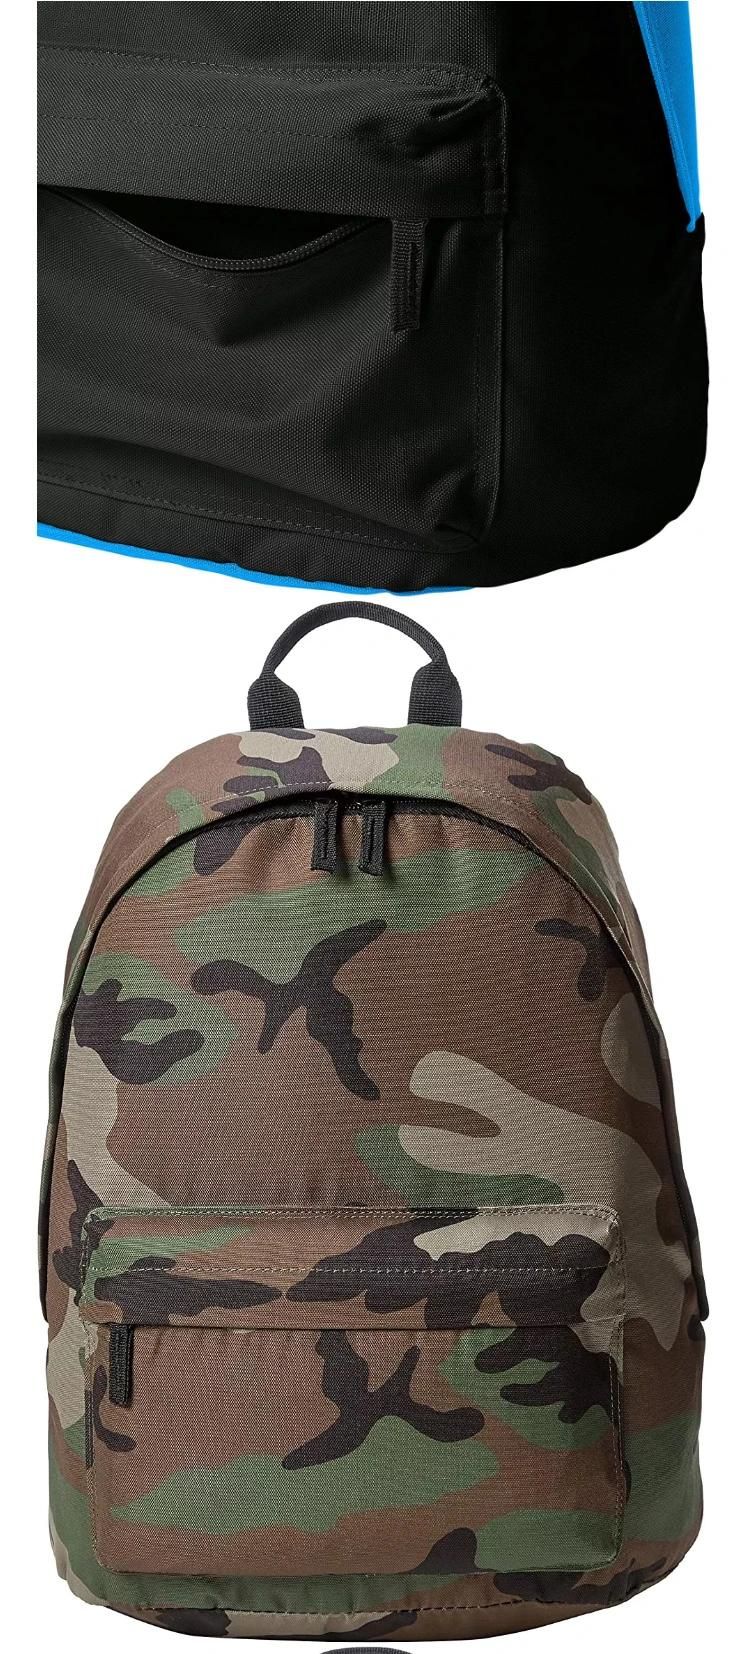 Fashion Gym Outdoor Hiking Backpack